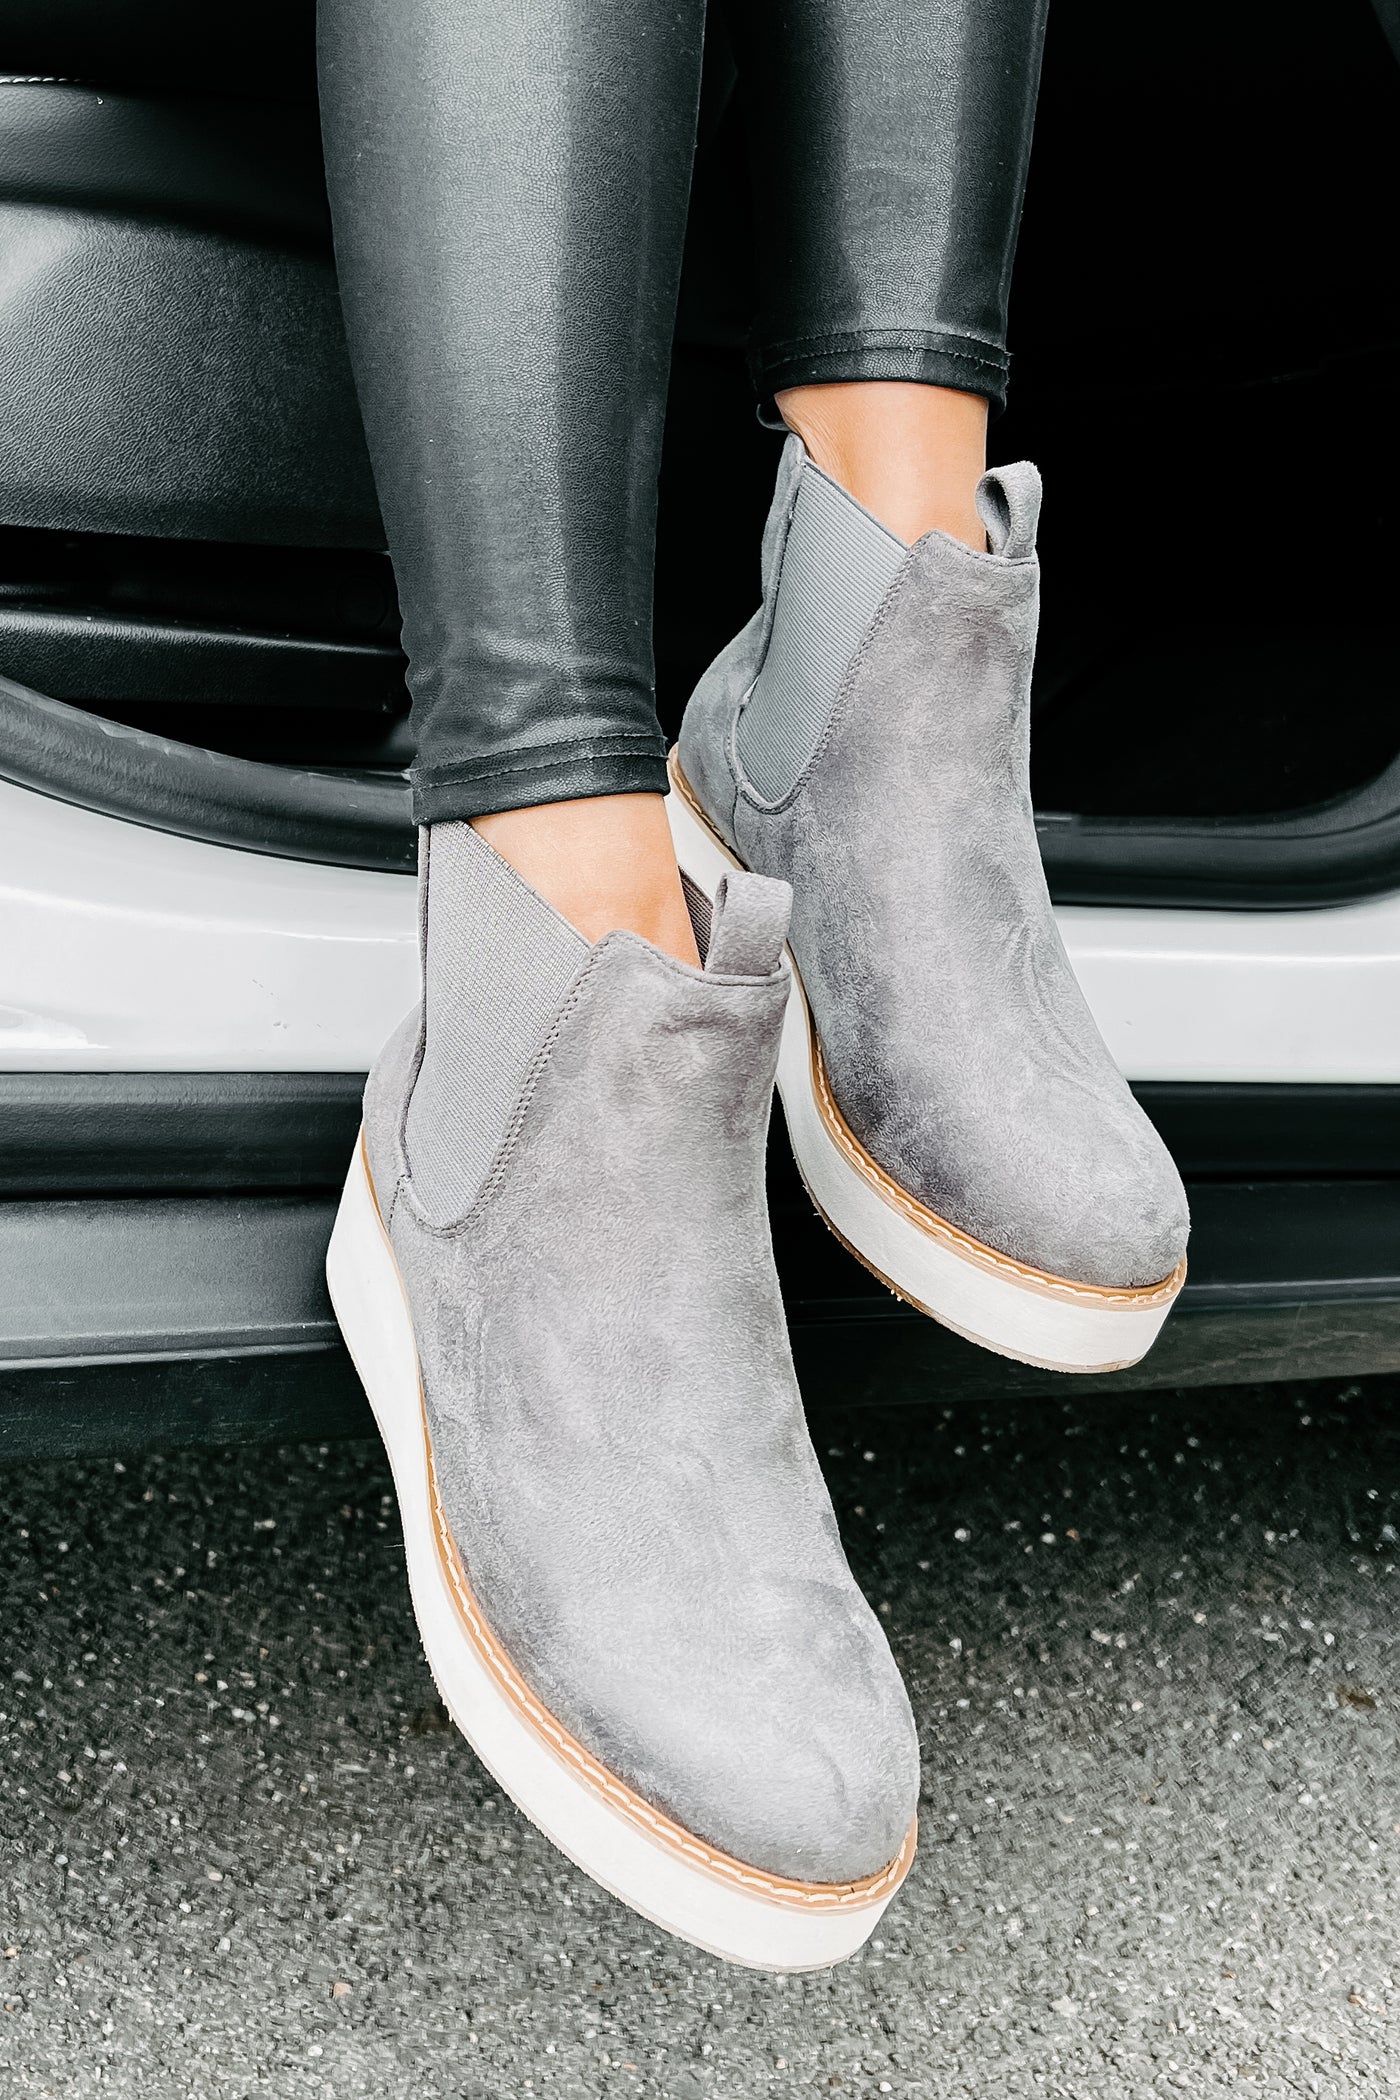 Faux Suede Wedge Booties